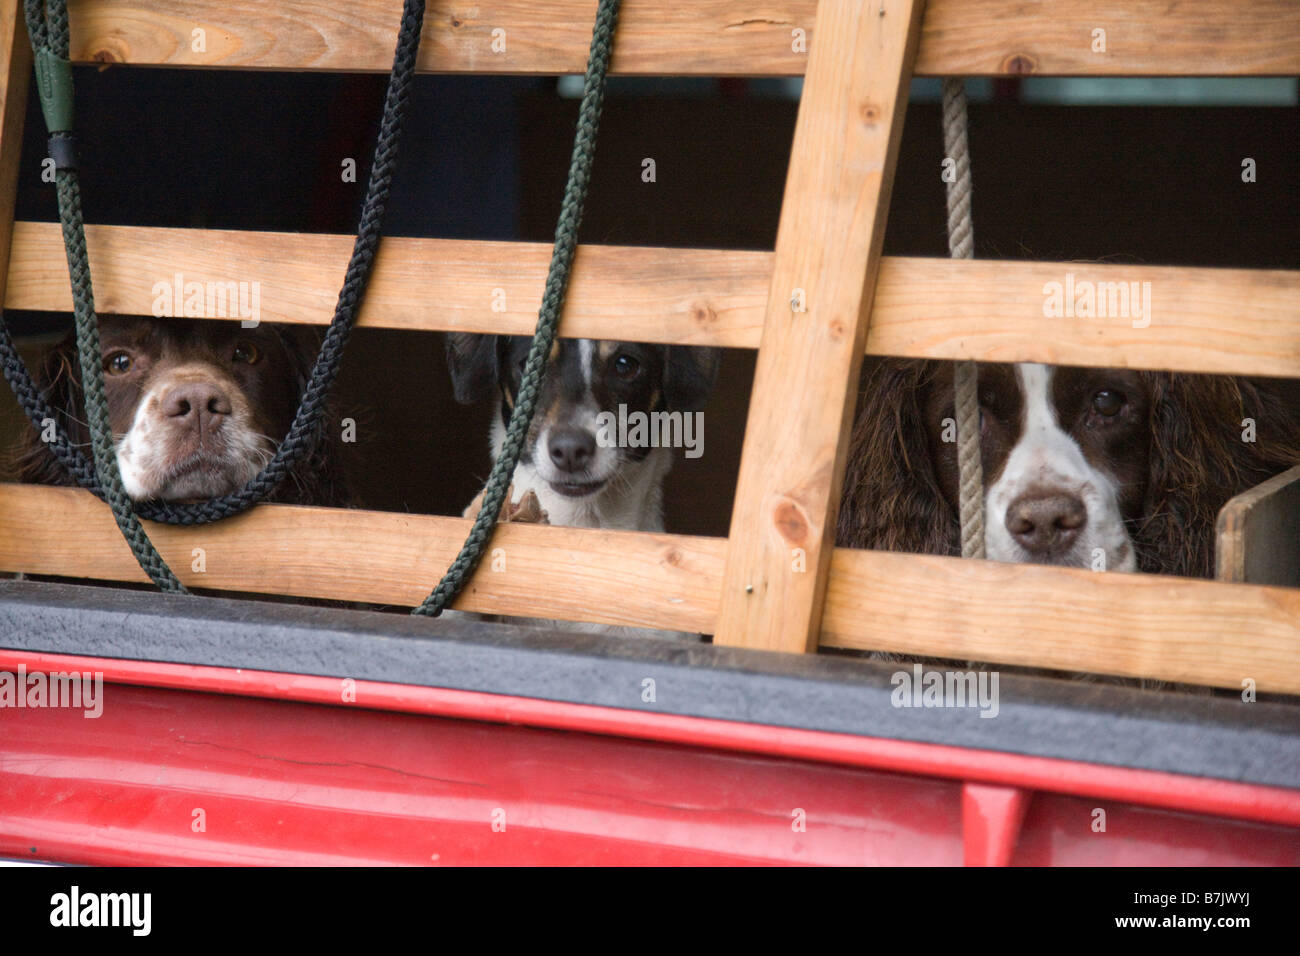 Dog s noses poking out between wooden bars of cage built in the back of a pickup truck Stock Photo